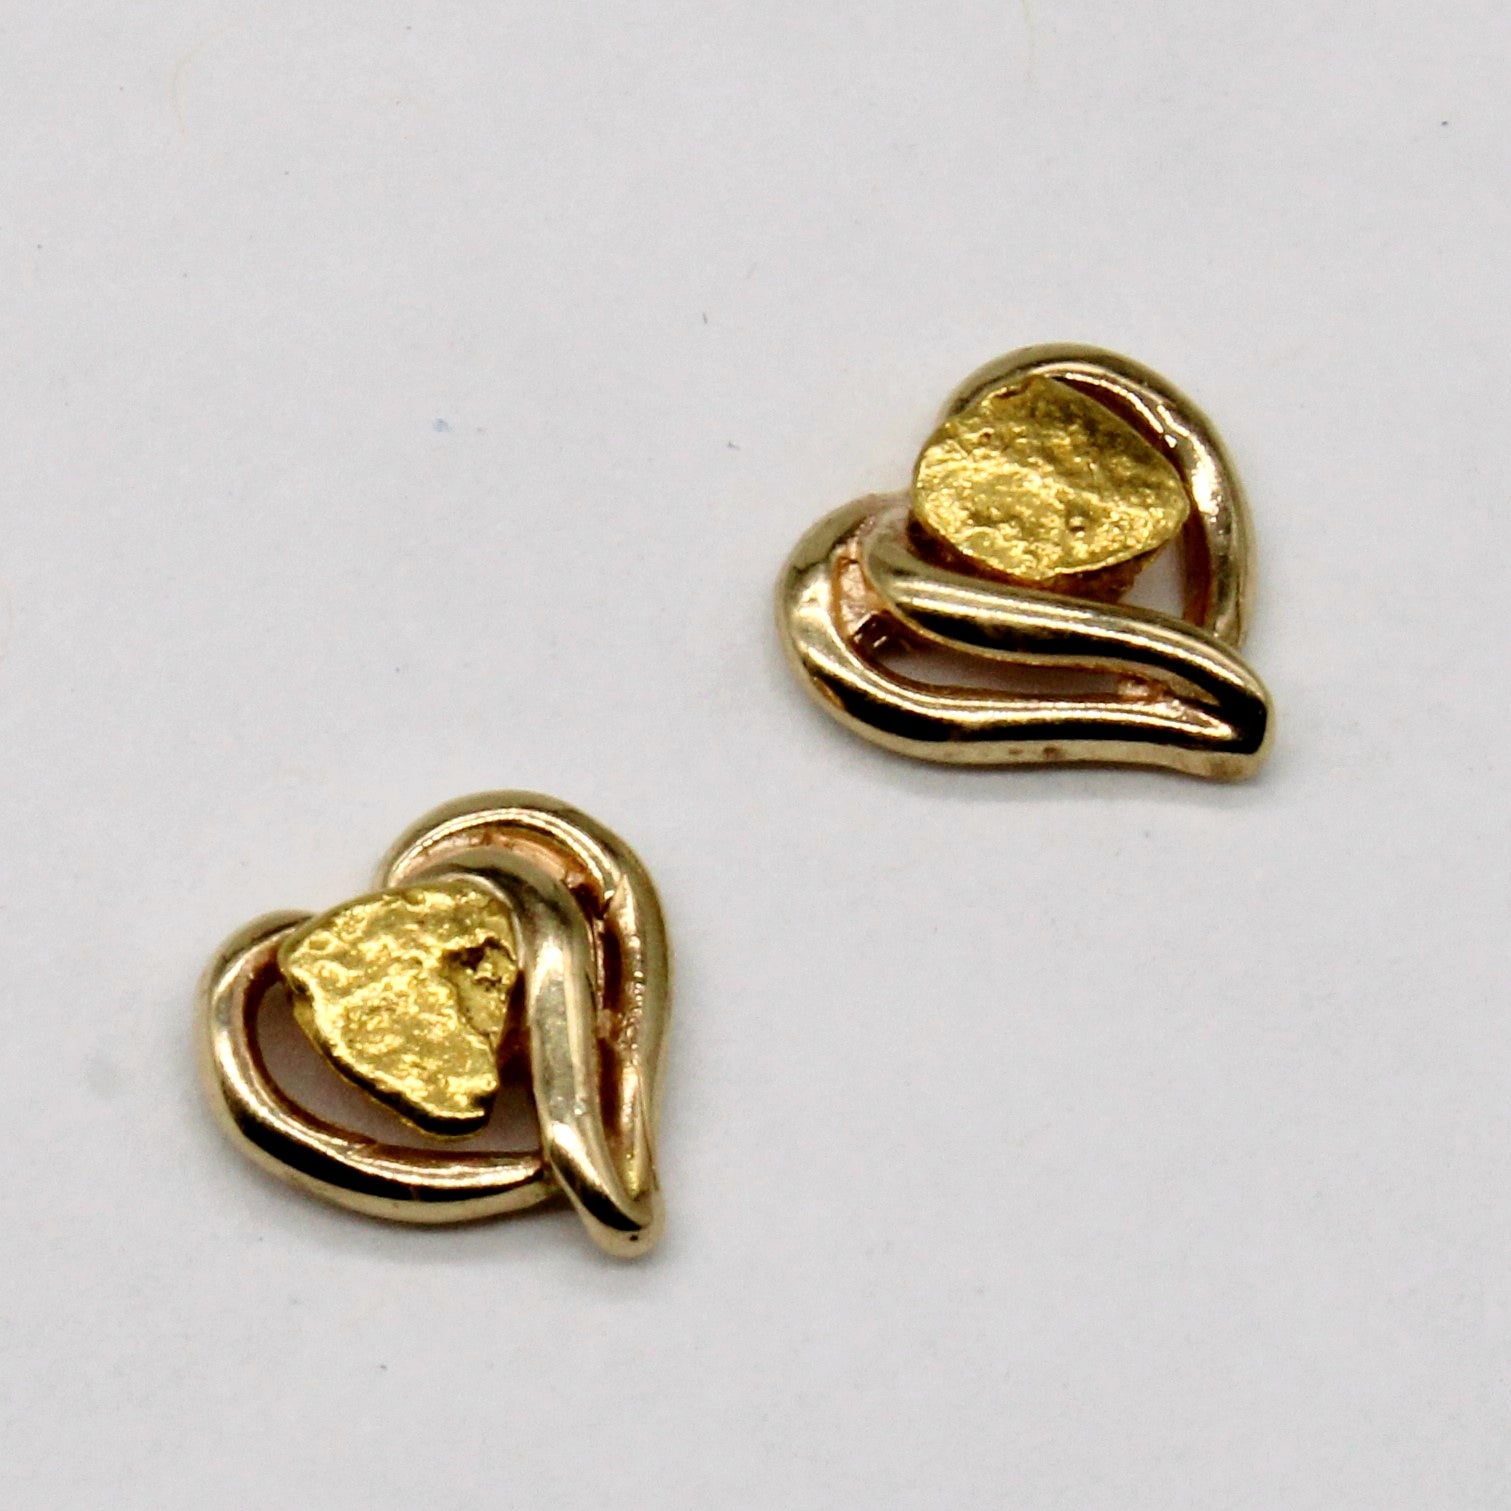 14k Yellow Gold Heart & Natural Nugget Earrings